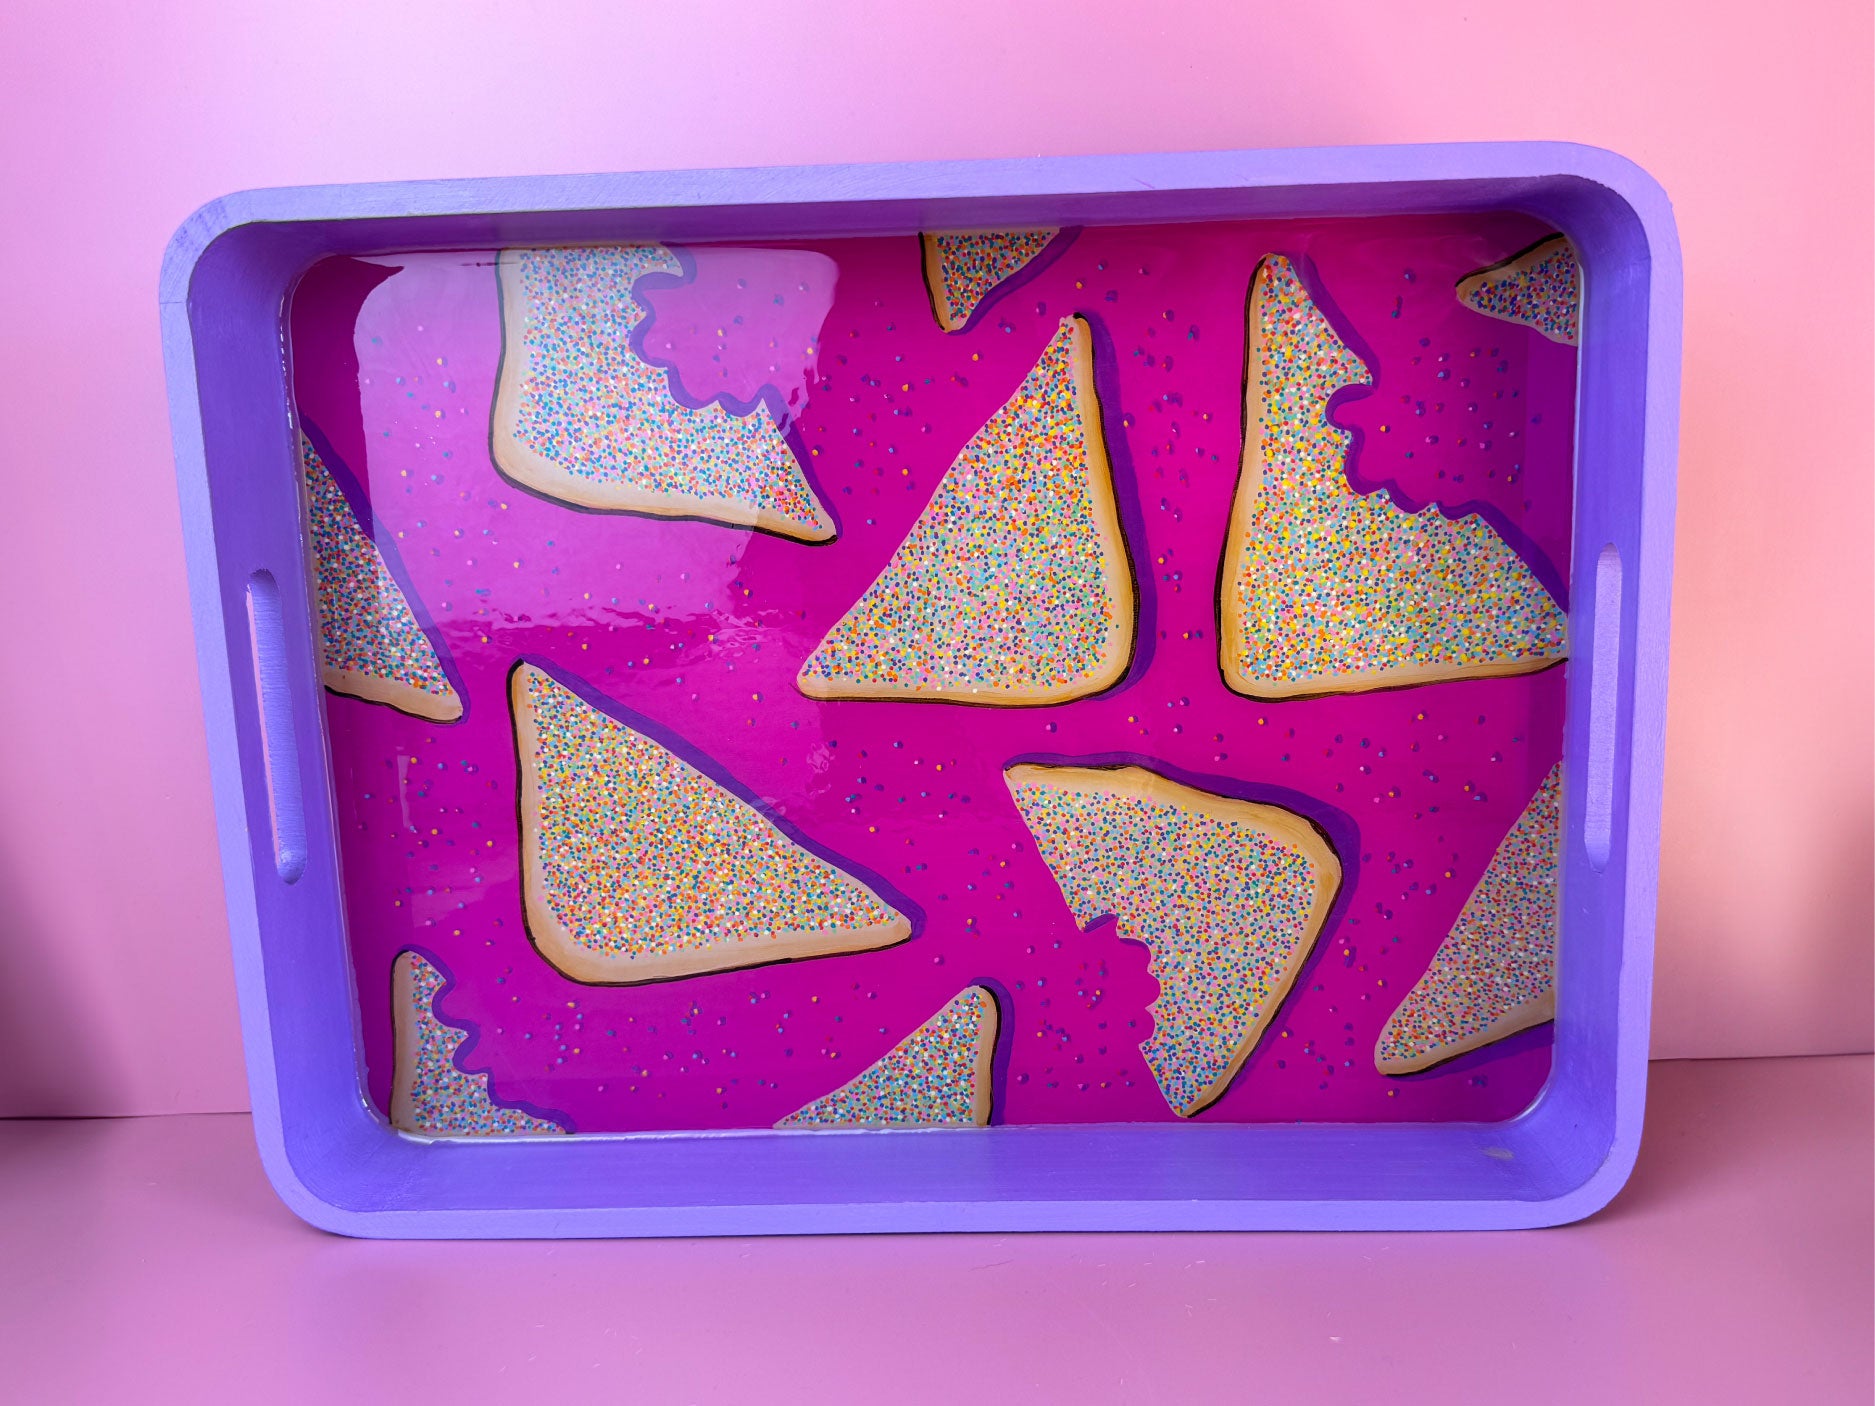 Hand-painted Resin Tray: Fairybread (Purple/Pink)